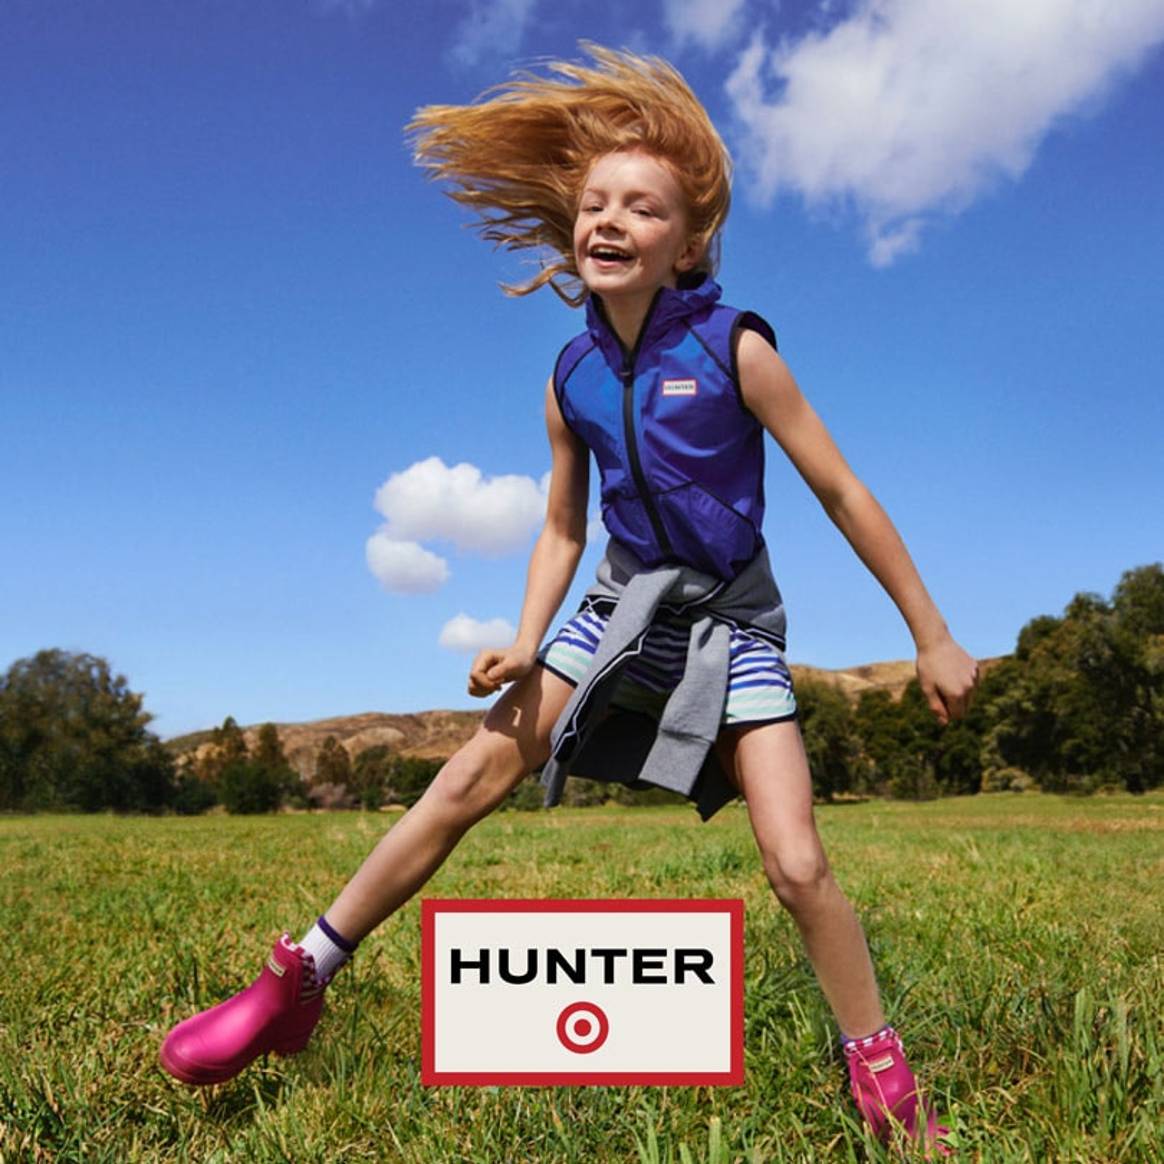 Hunter teams up with Target for limited-edition collection